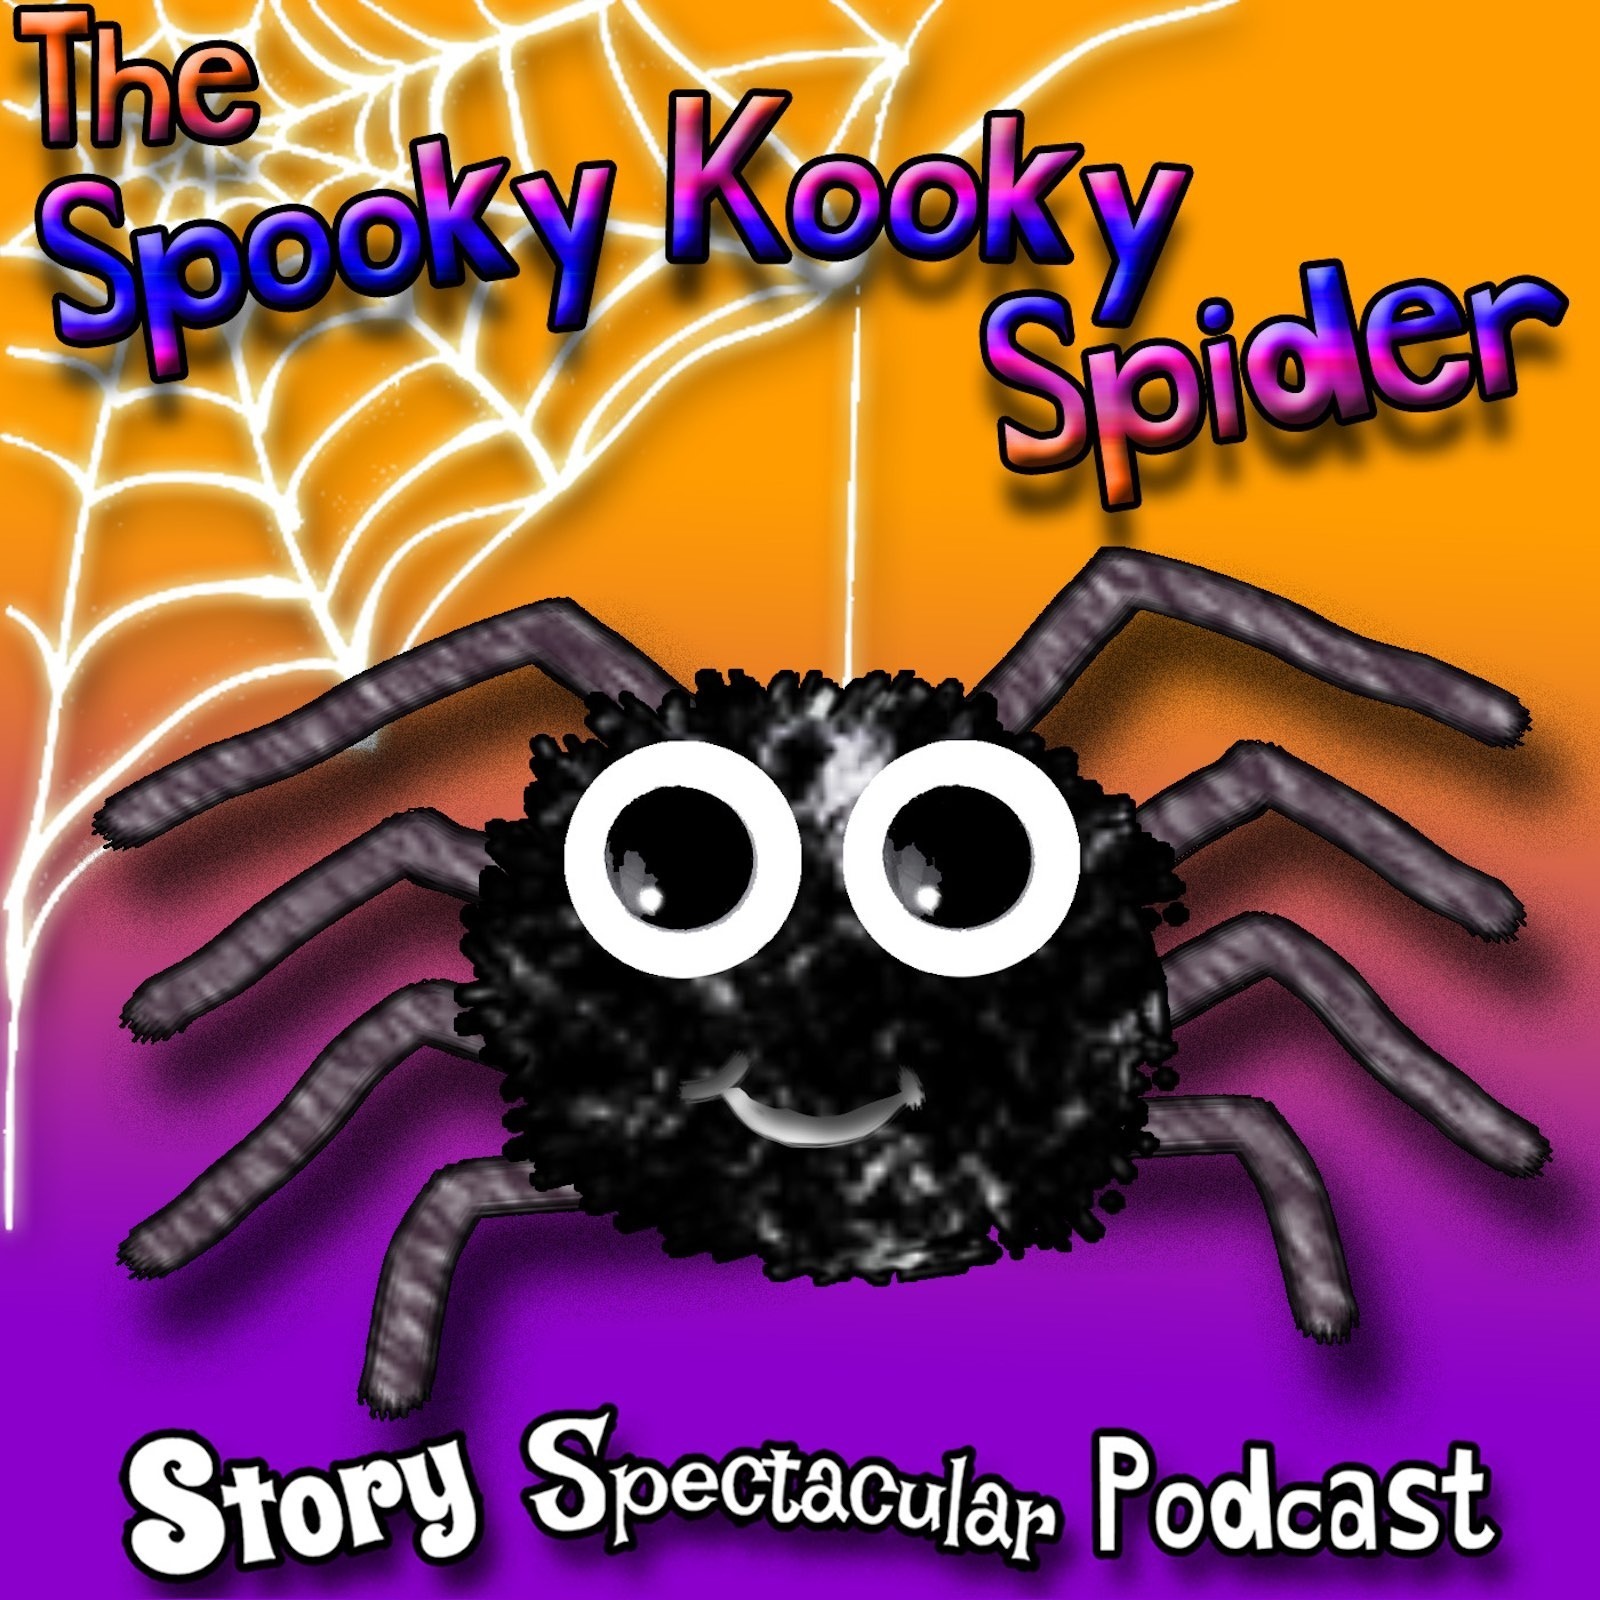 The Spooky Kooky Spider